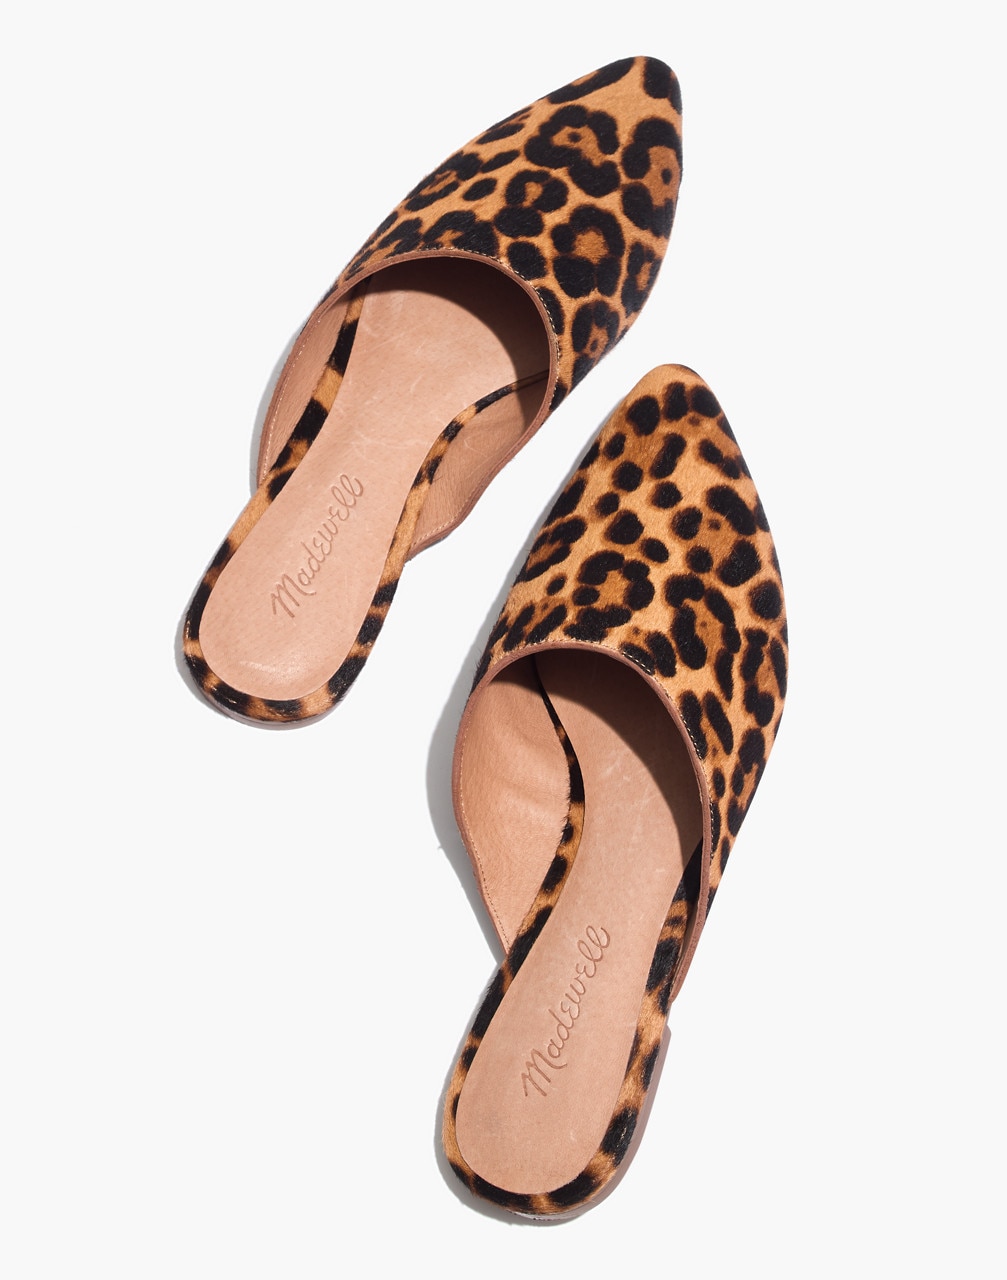 The Daily Hunt: Leopard Print Mules and 